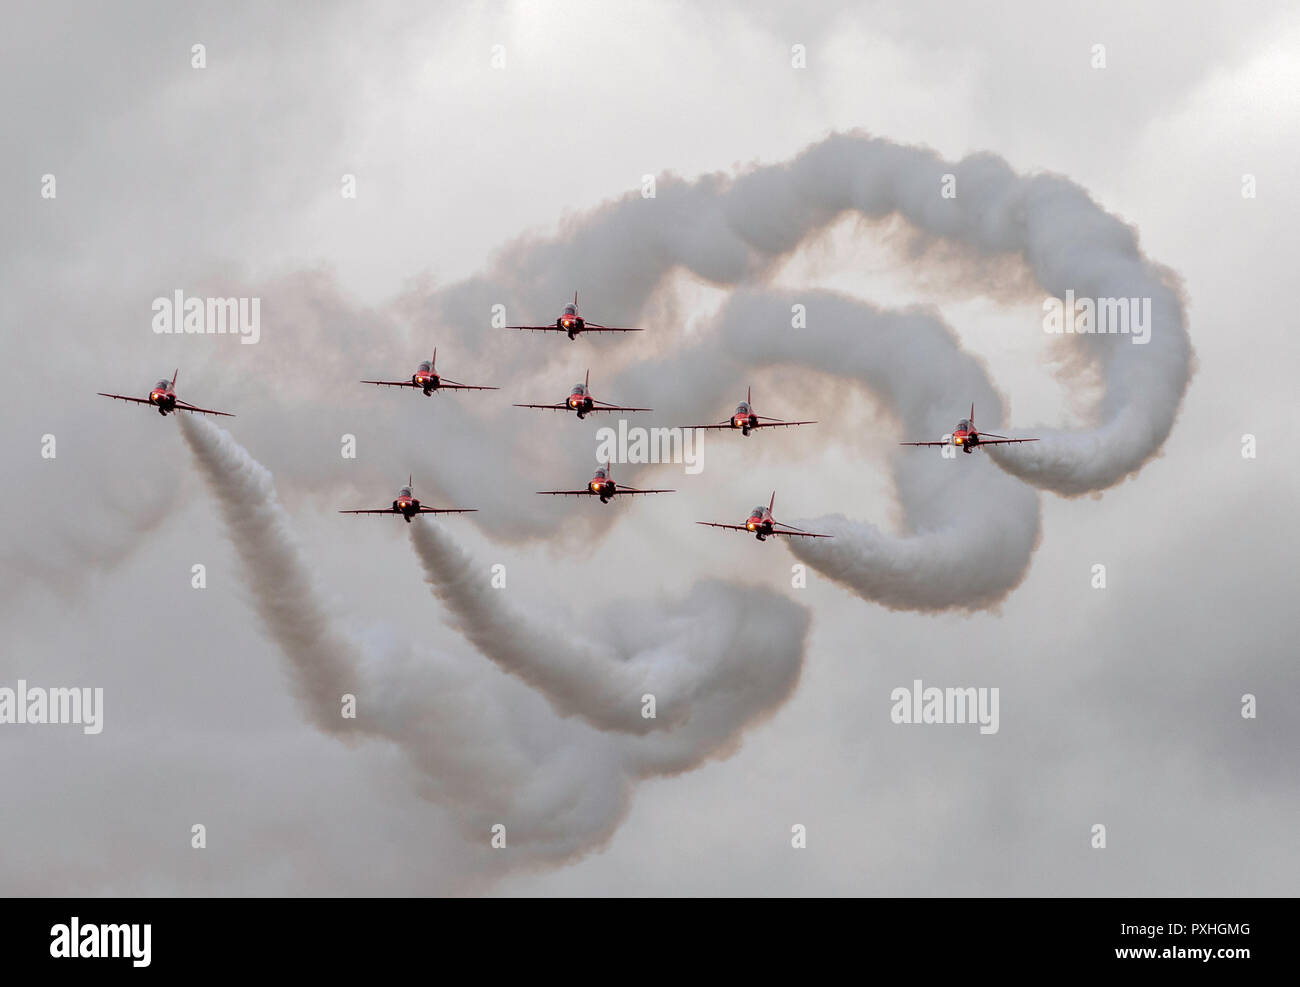 Nine Red Arrows Royal Airforce aerobatic display team with white smoke trails in flight over Highclere Castle, Berkshire, England Stock Photo